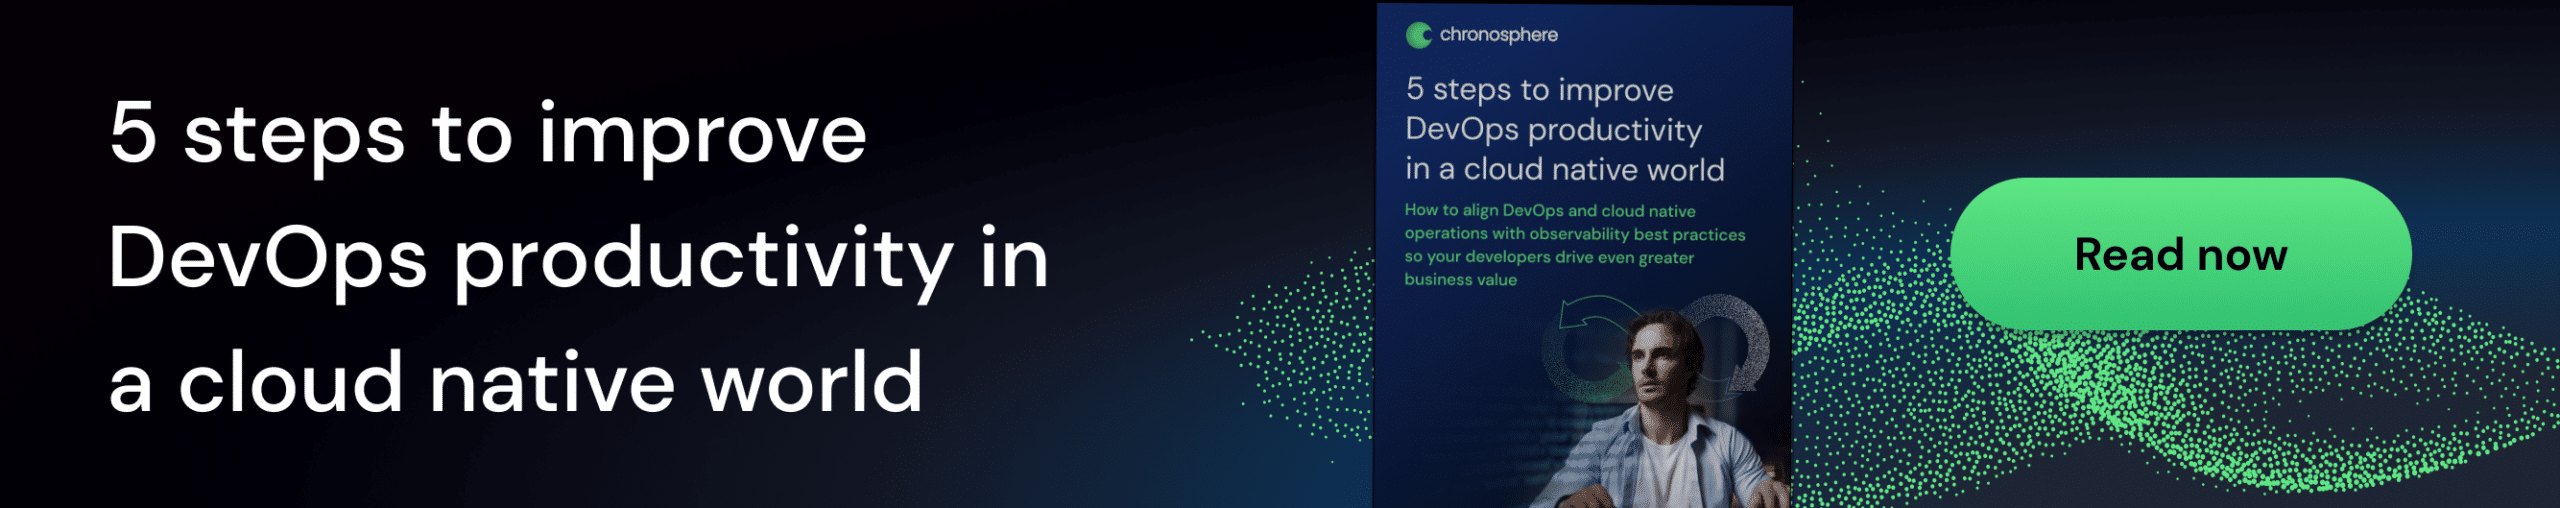 Banner with the text "5 Steps to Improve DevOps Productivity in a Cloud Native World" and a "Read Now" button, alongside an image of a booklet with the same title. The green and black color scheme emphasizes developer efficiency and observability.